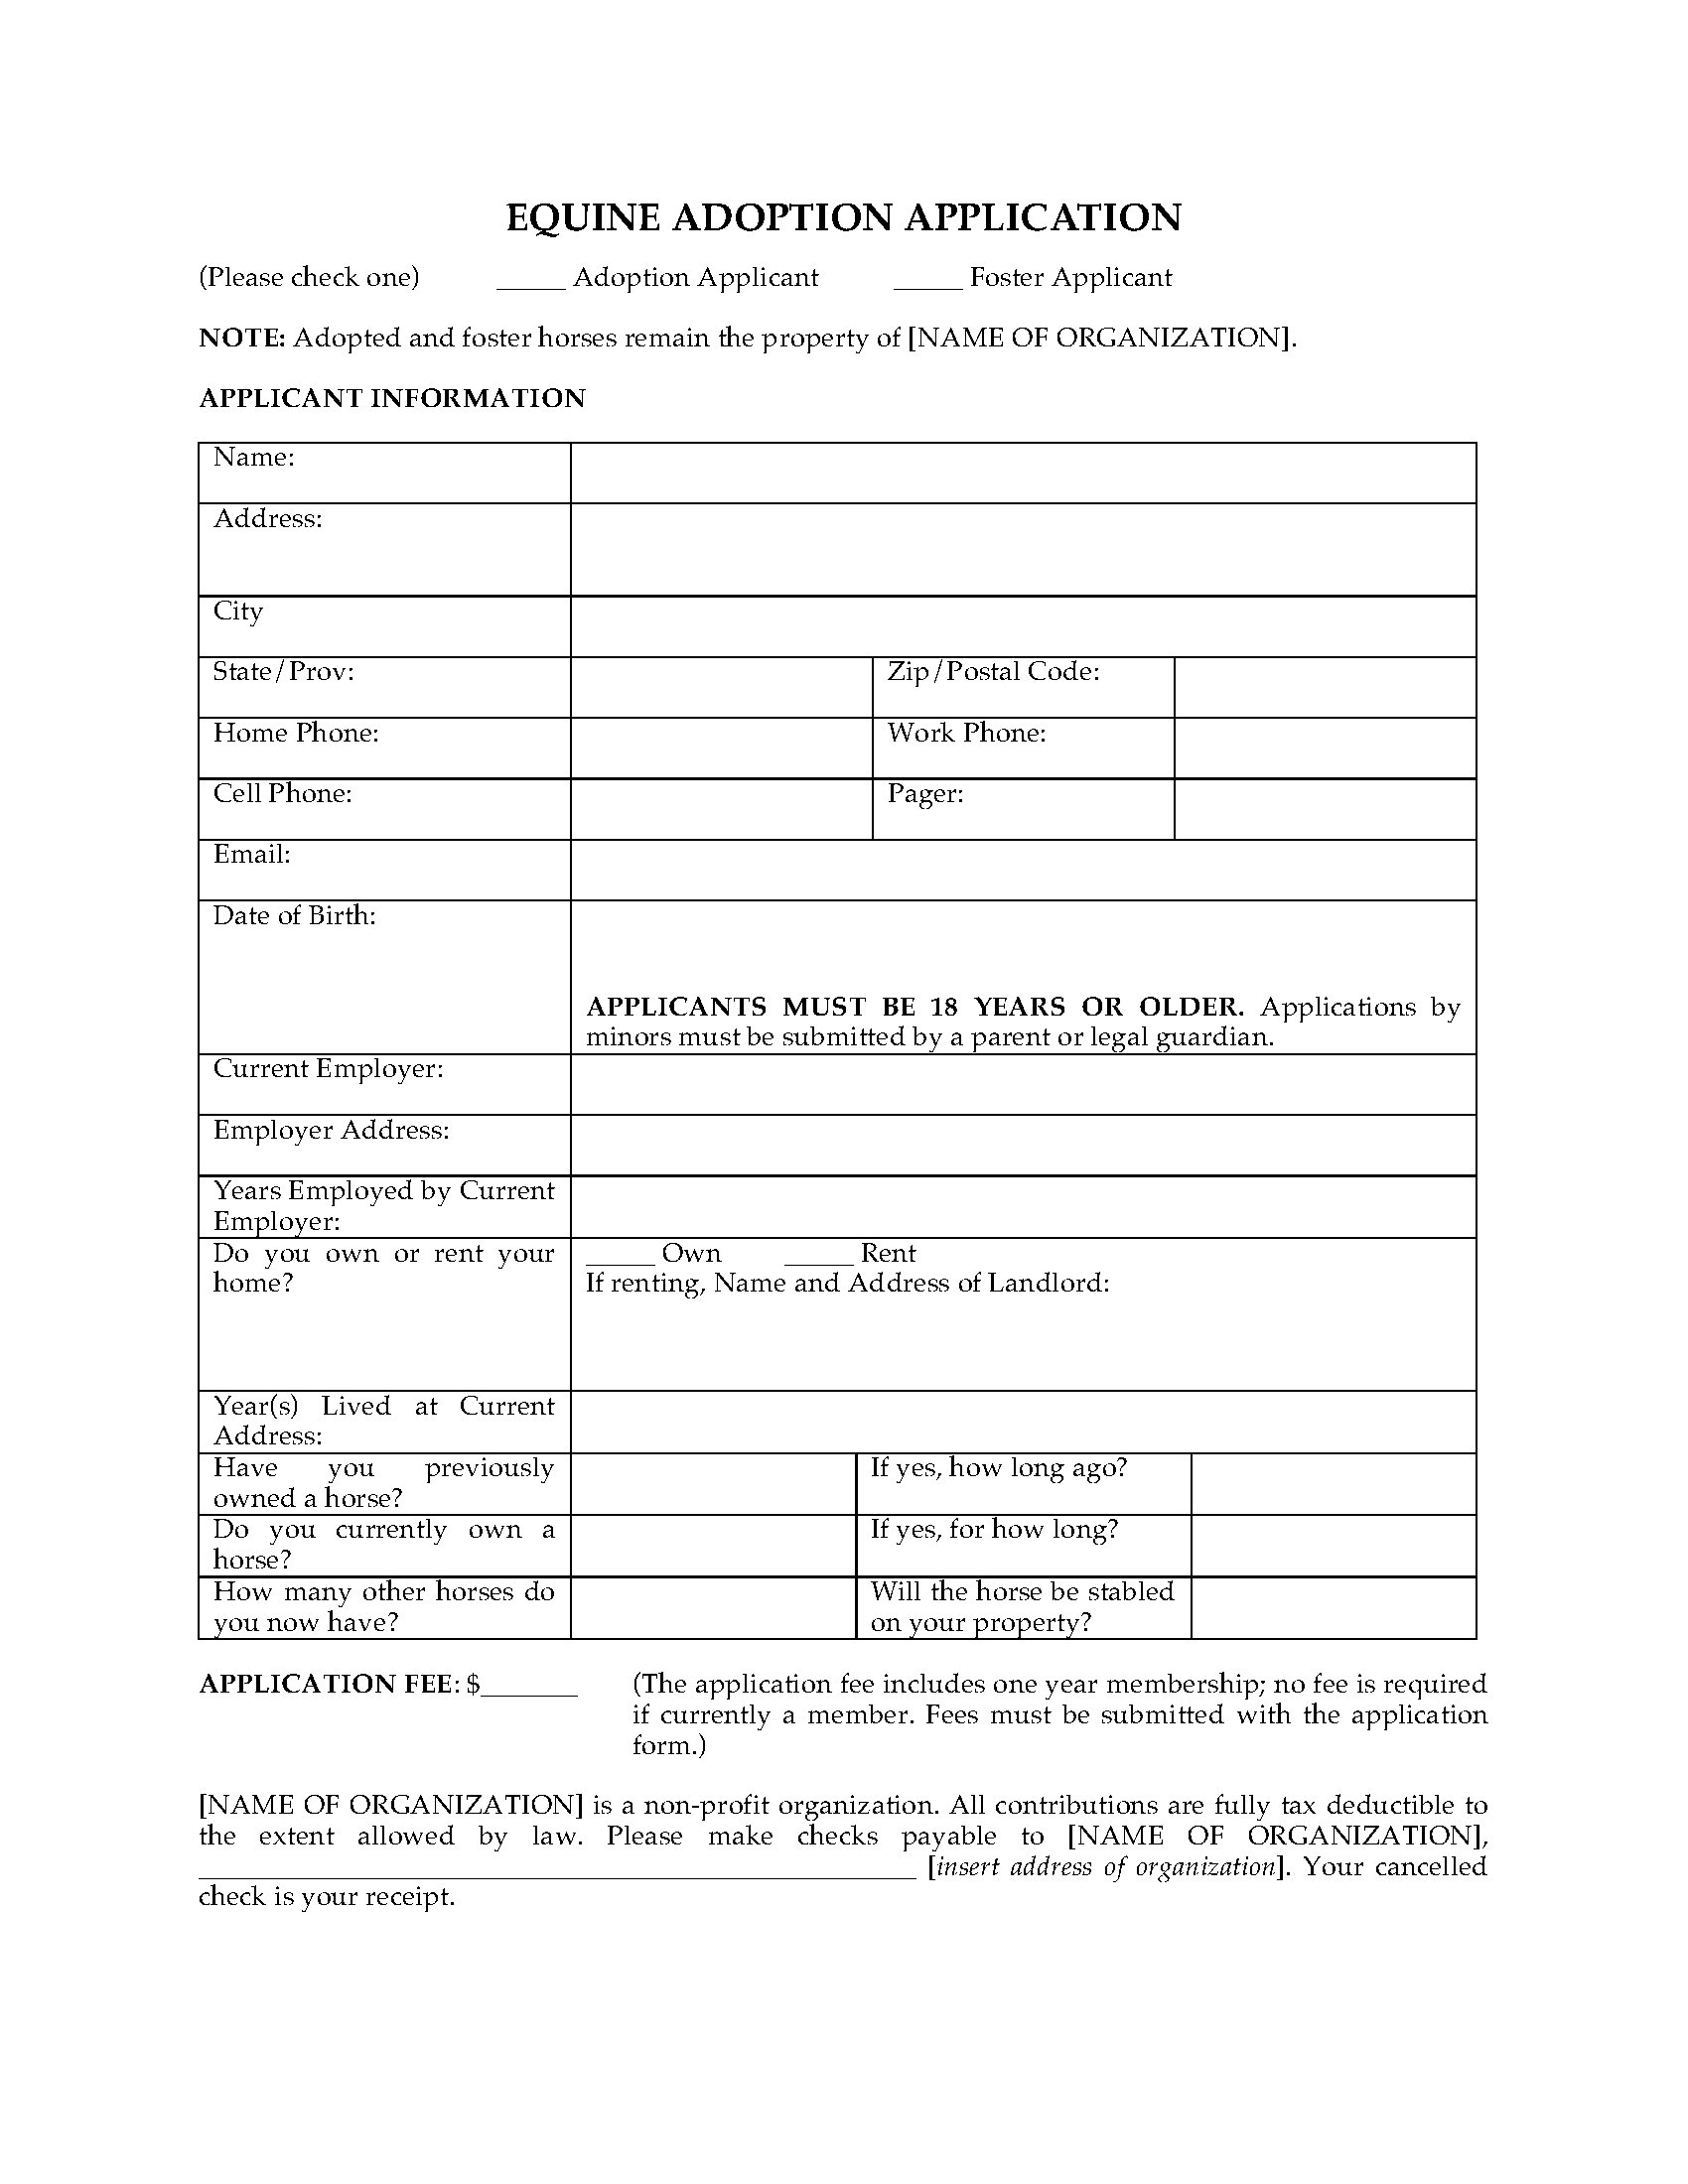 equine-adoption-application-form-legal-forms-and-business-templates